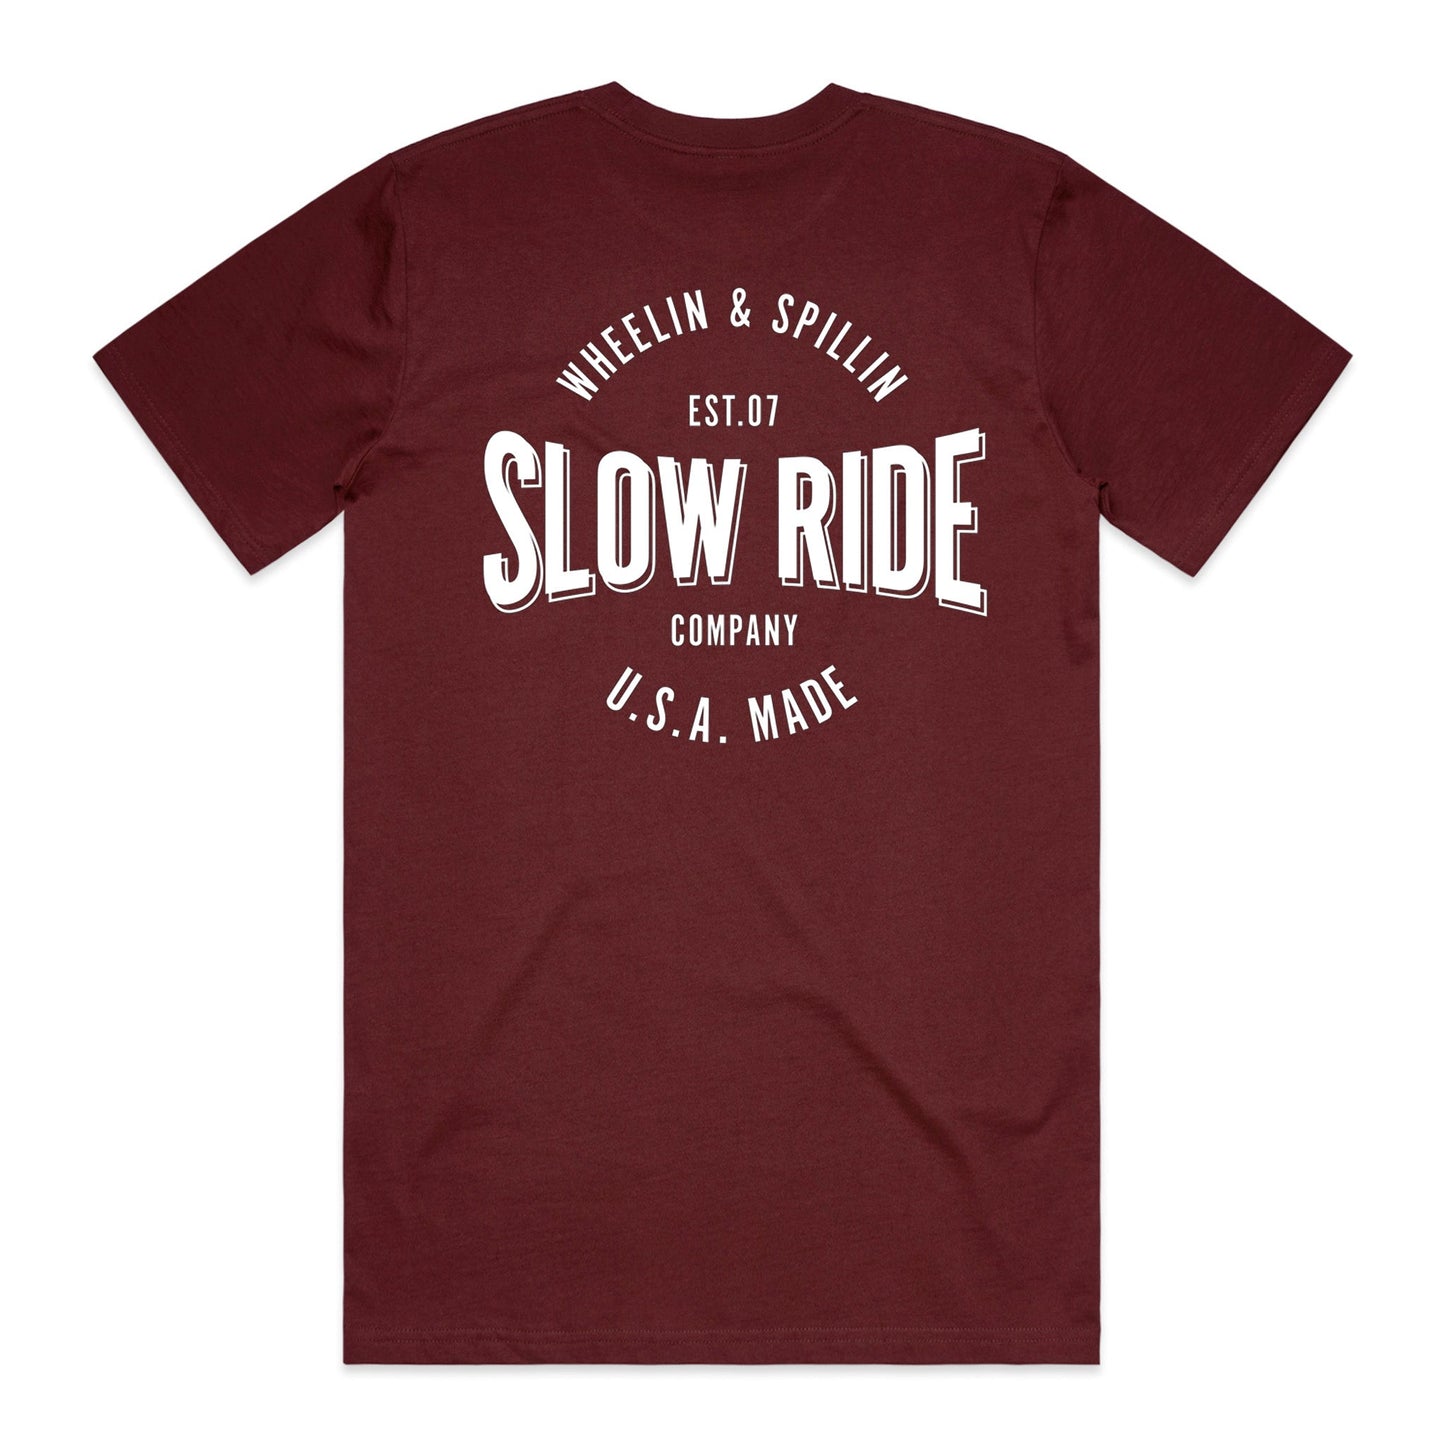 U.S.A. Made Tee (3 Colors) - Slow Ride